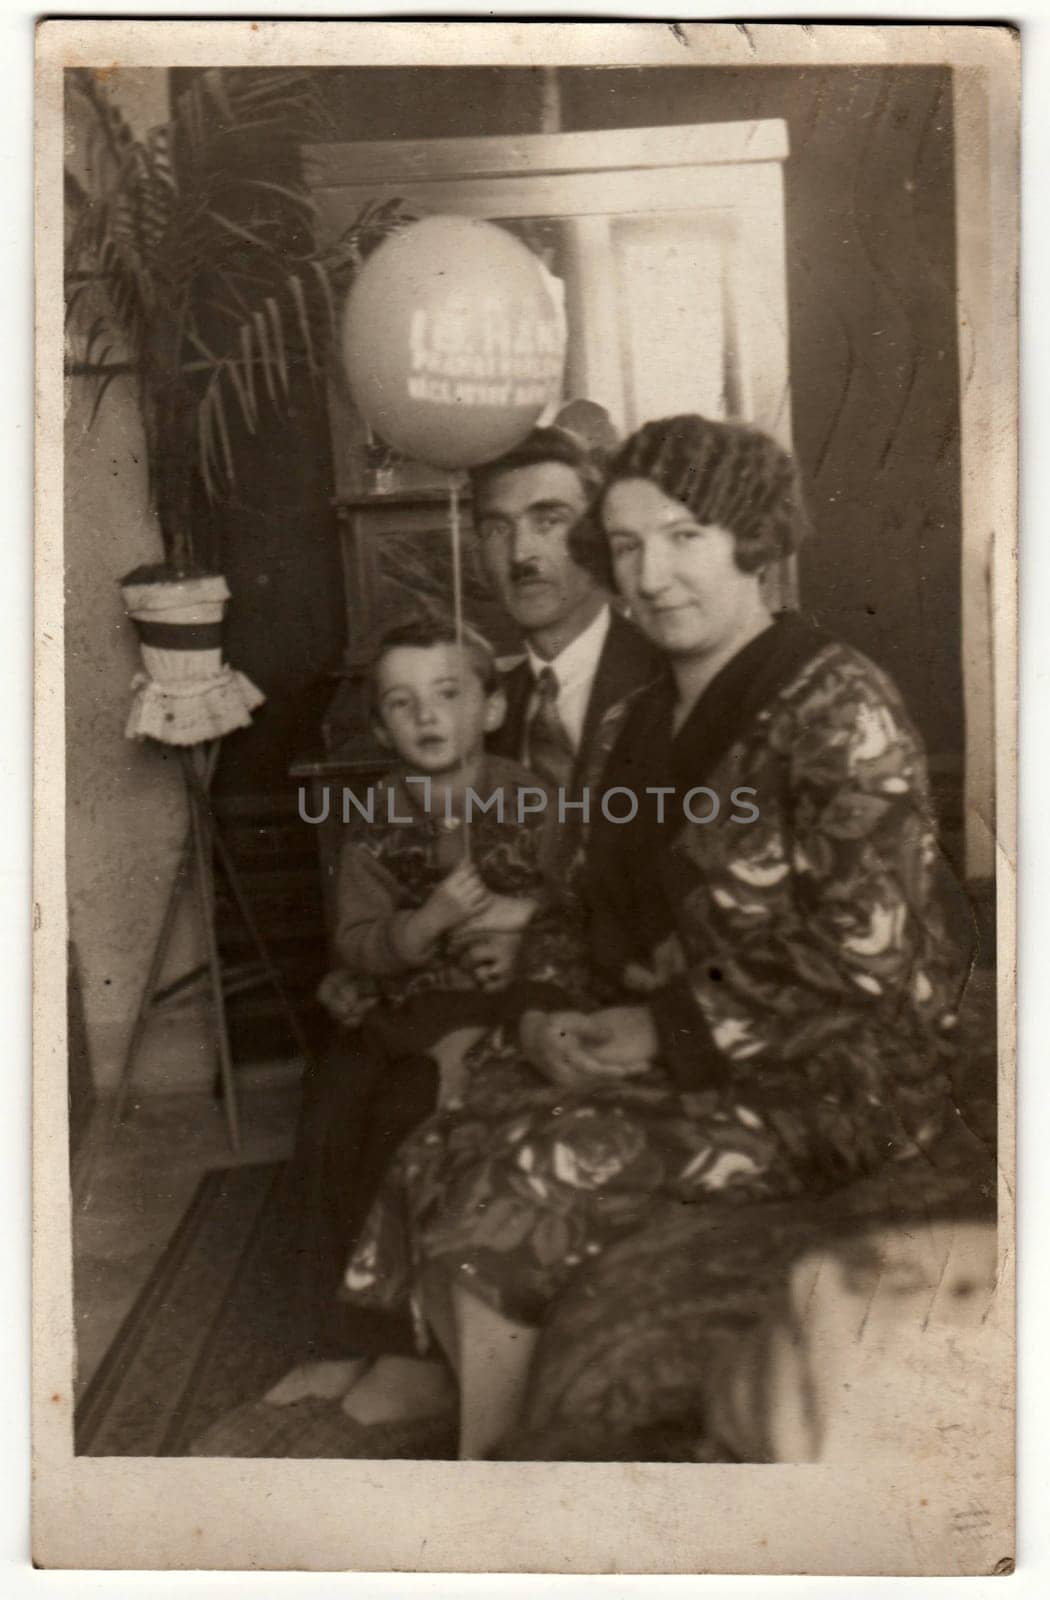 PRAHA (PRAGUE), THE CZECHOSLOVAK REPUBLIC - MARCH 15, 1931: Vintage photo shows family in the living room. Boy holds air-ball - inflatable ball. Retro black and white photography. Circa 1930s.